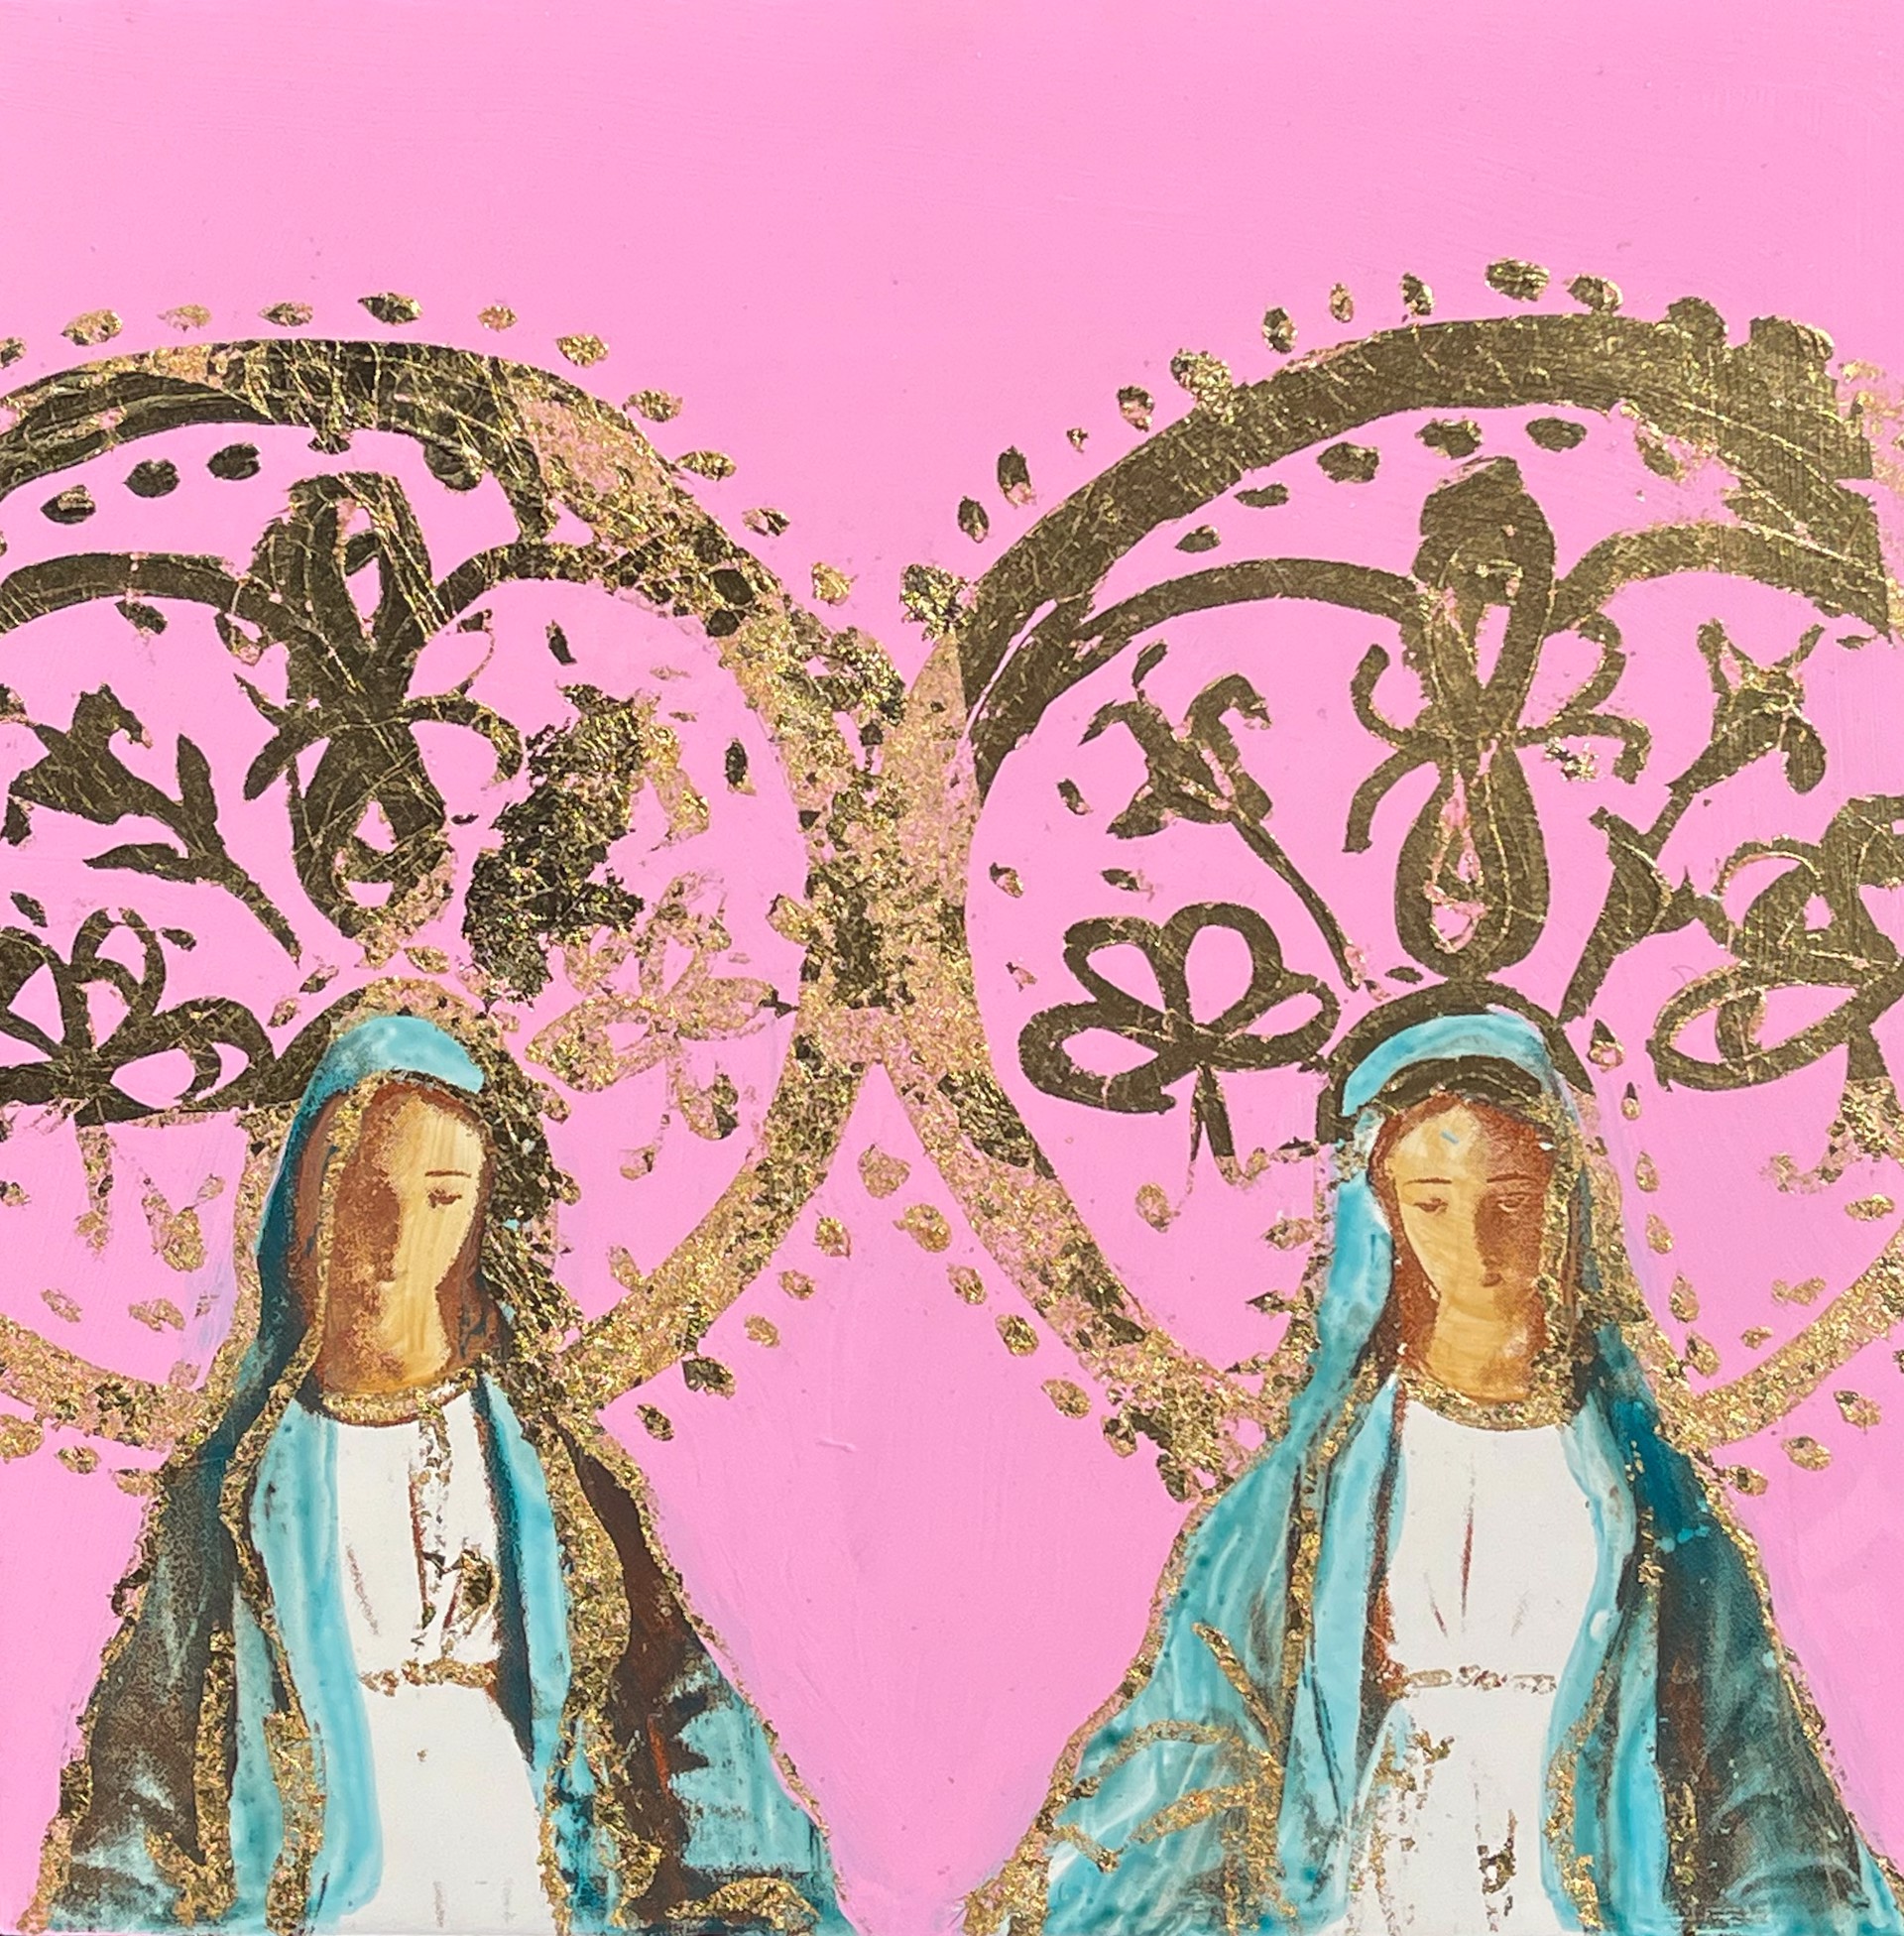 Mirrored Hail Mary in Rose Pink by Megan Coonelly